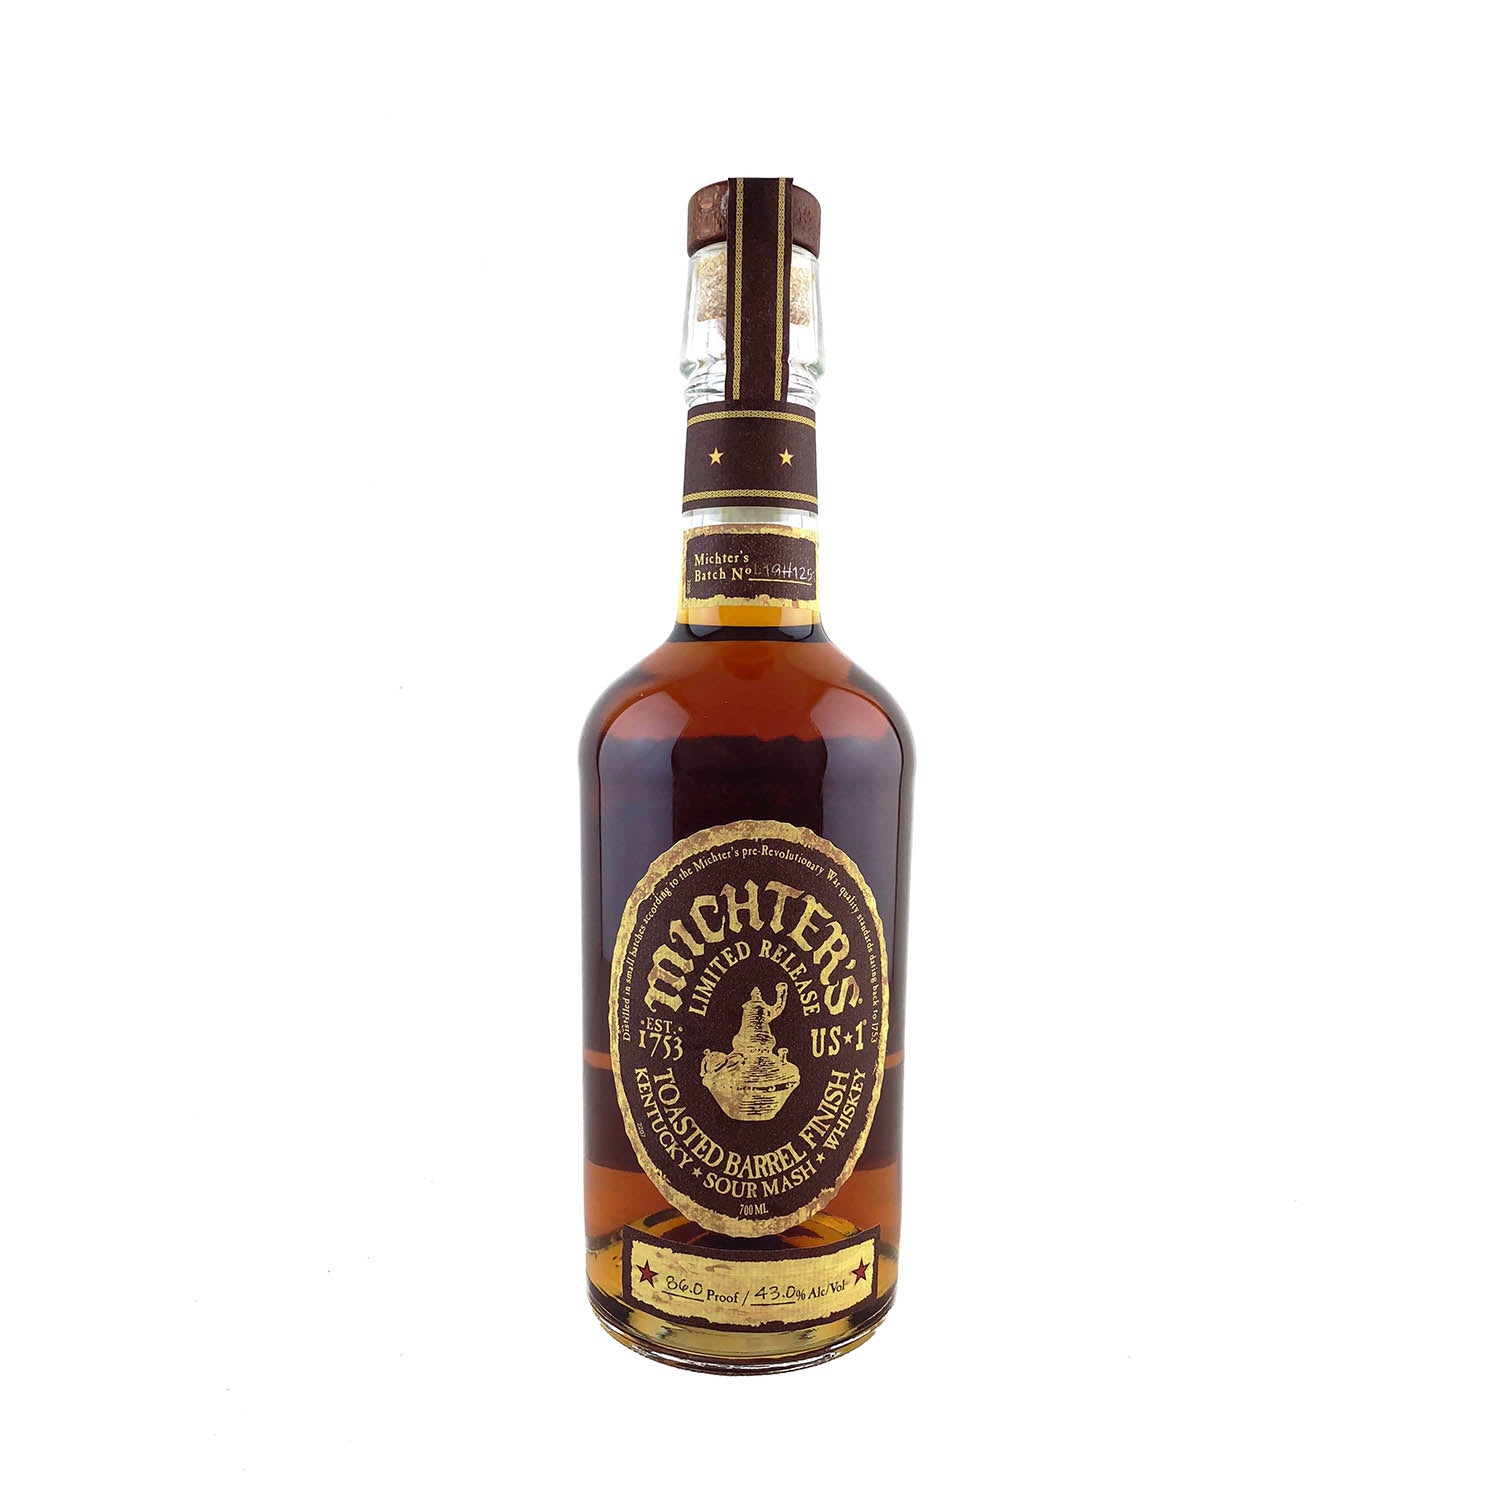 Michter's US 1 Toasted Barrel Finish Limited Release Kentucky Sour Mash Whiskey 700ml